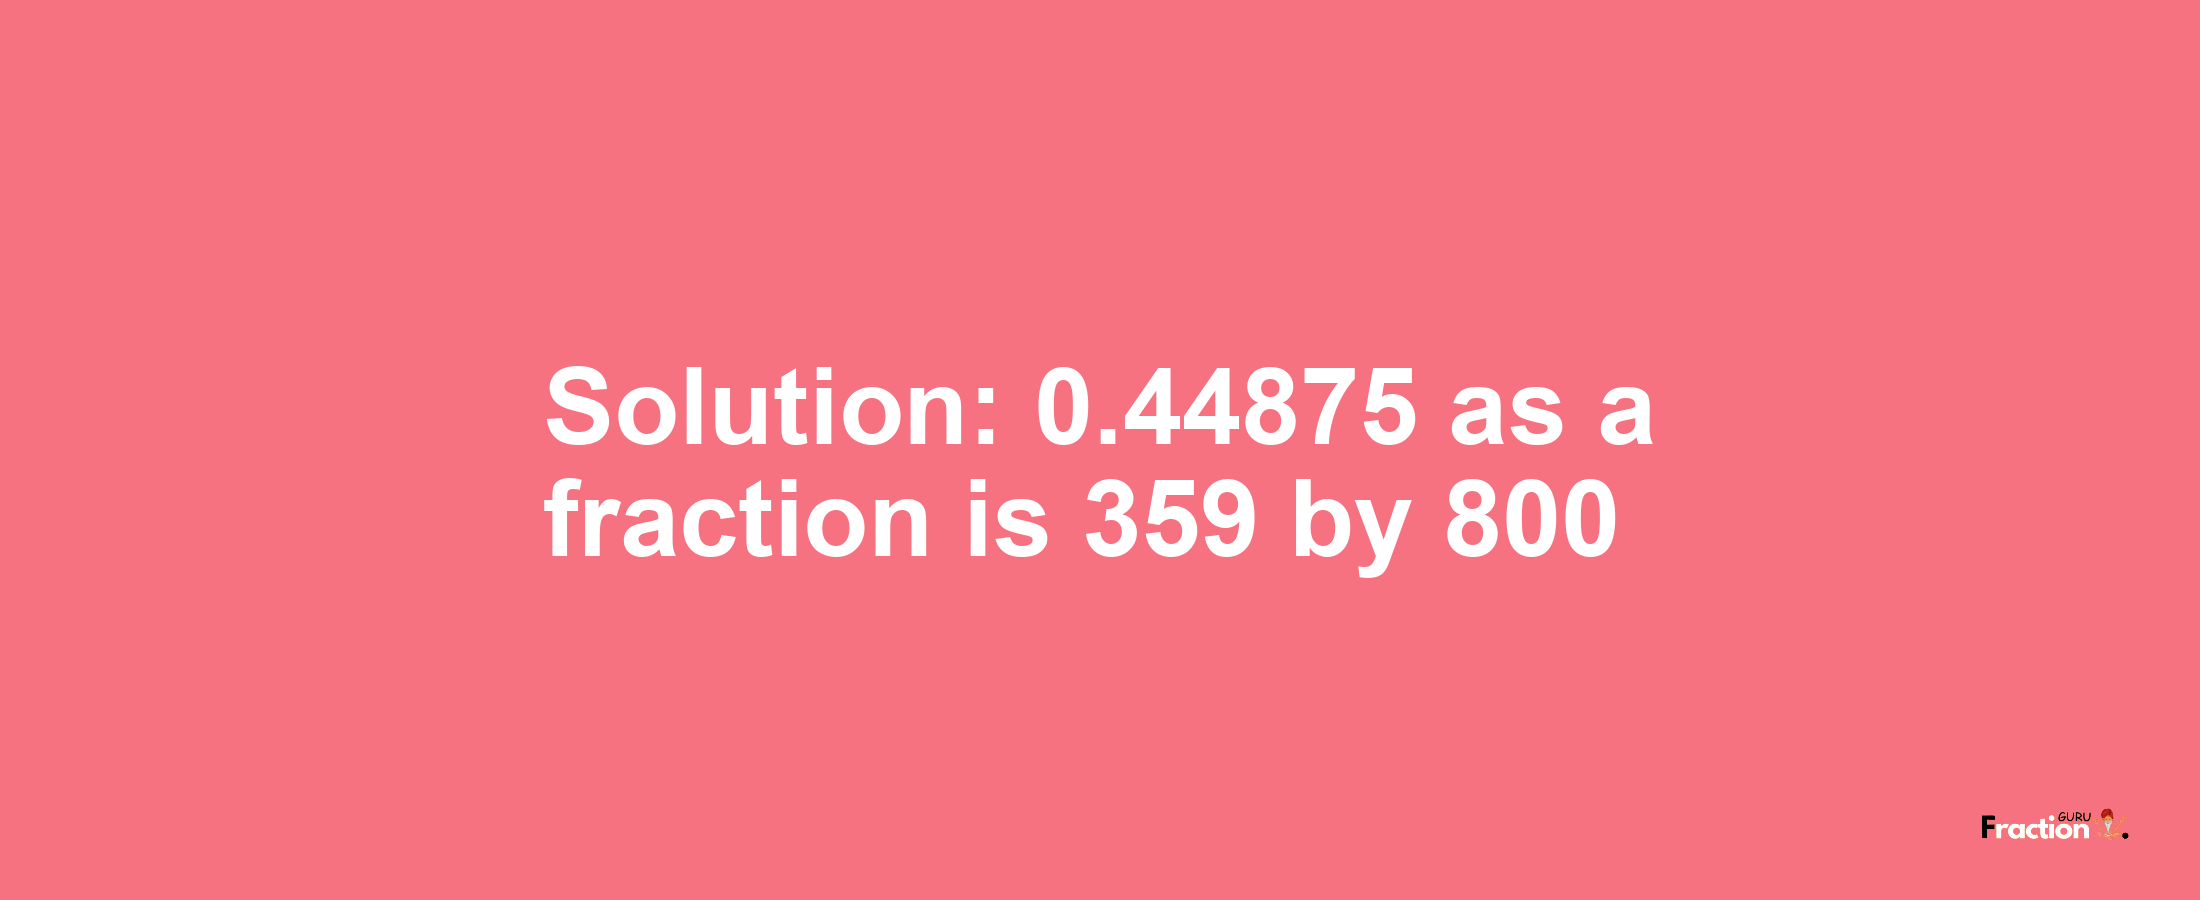 Solution:0.44875 as a fraction is 359/800